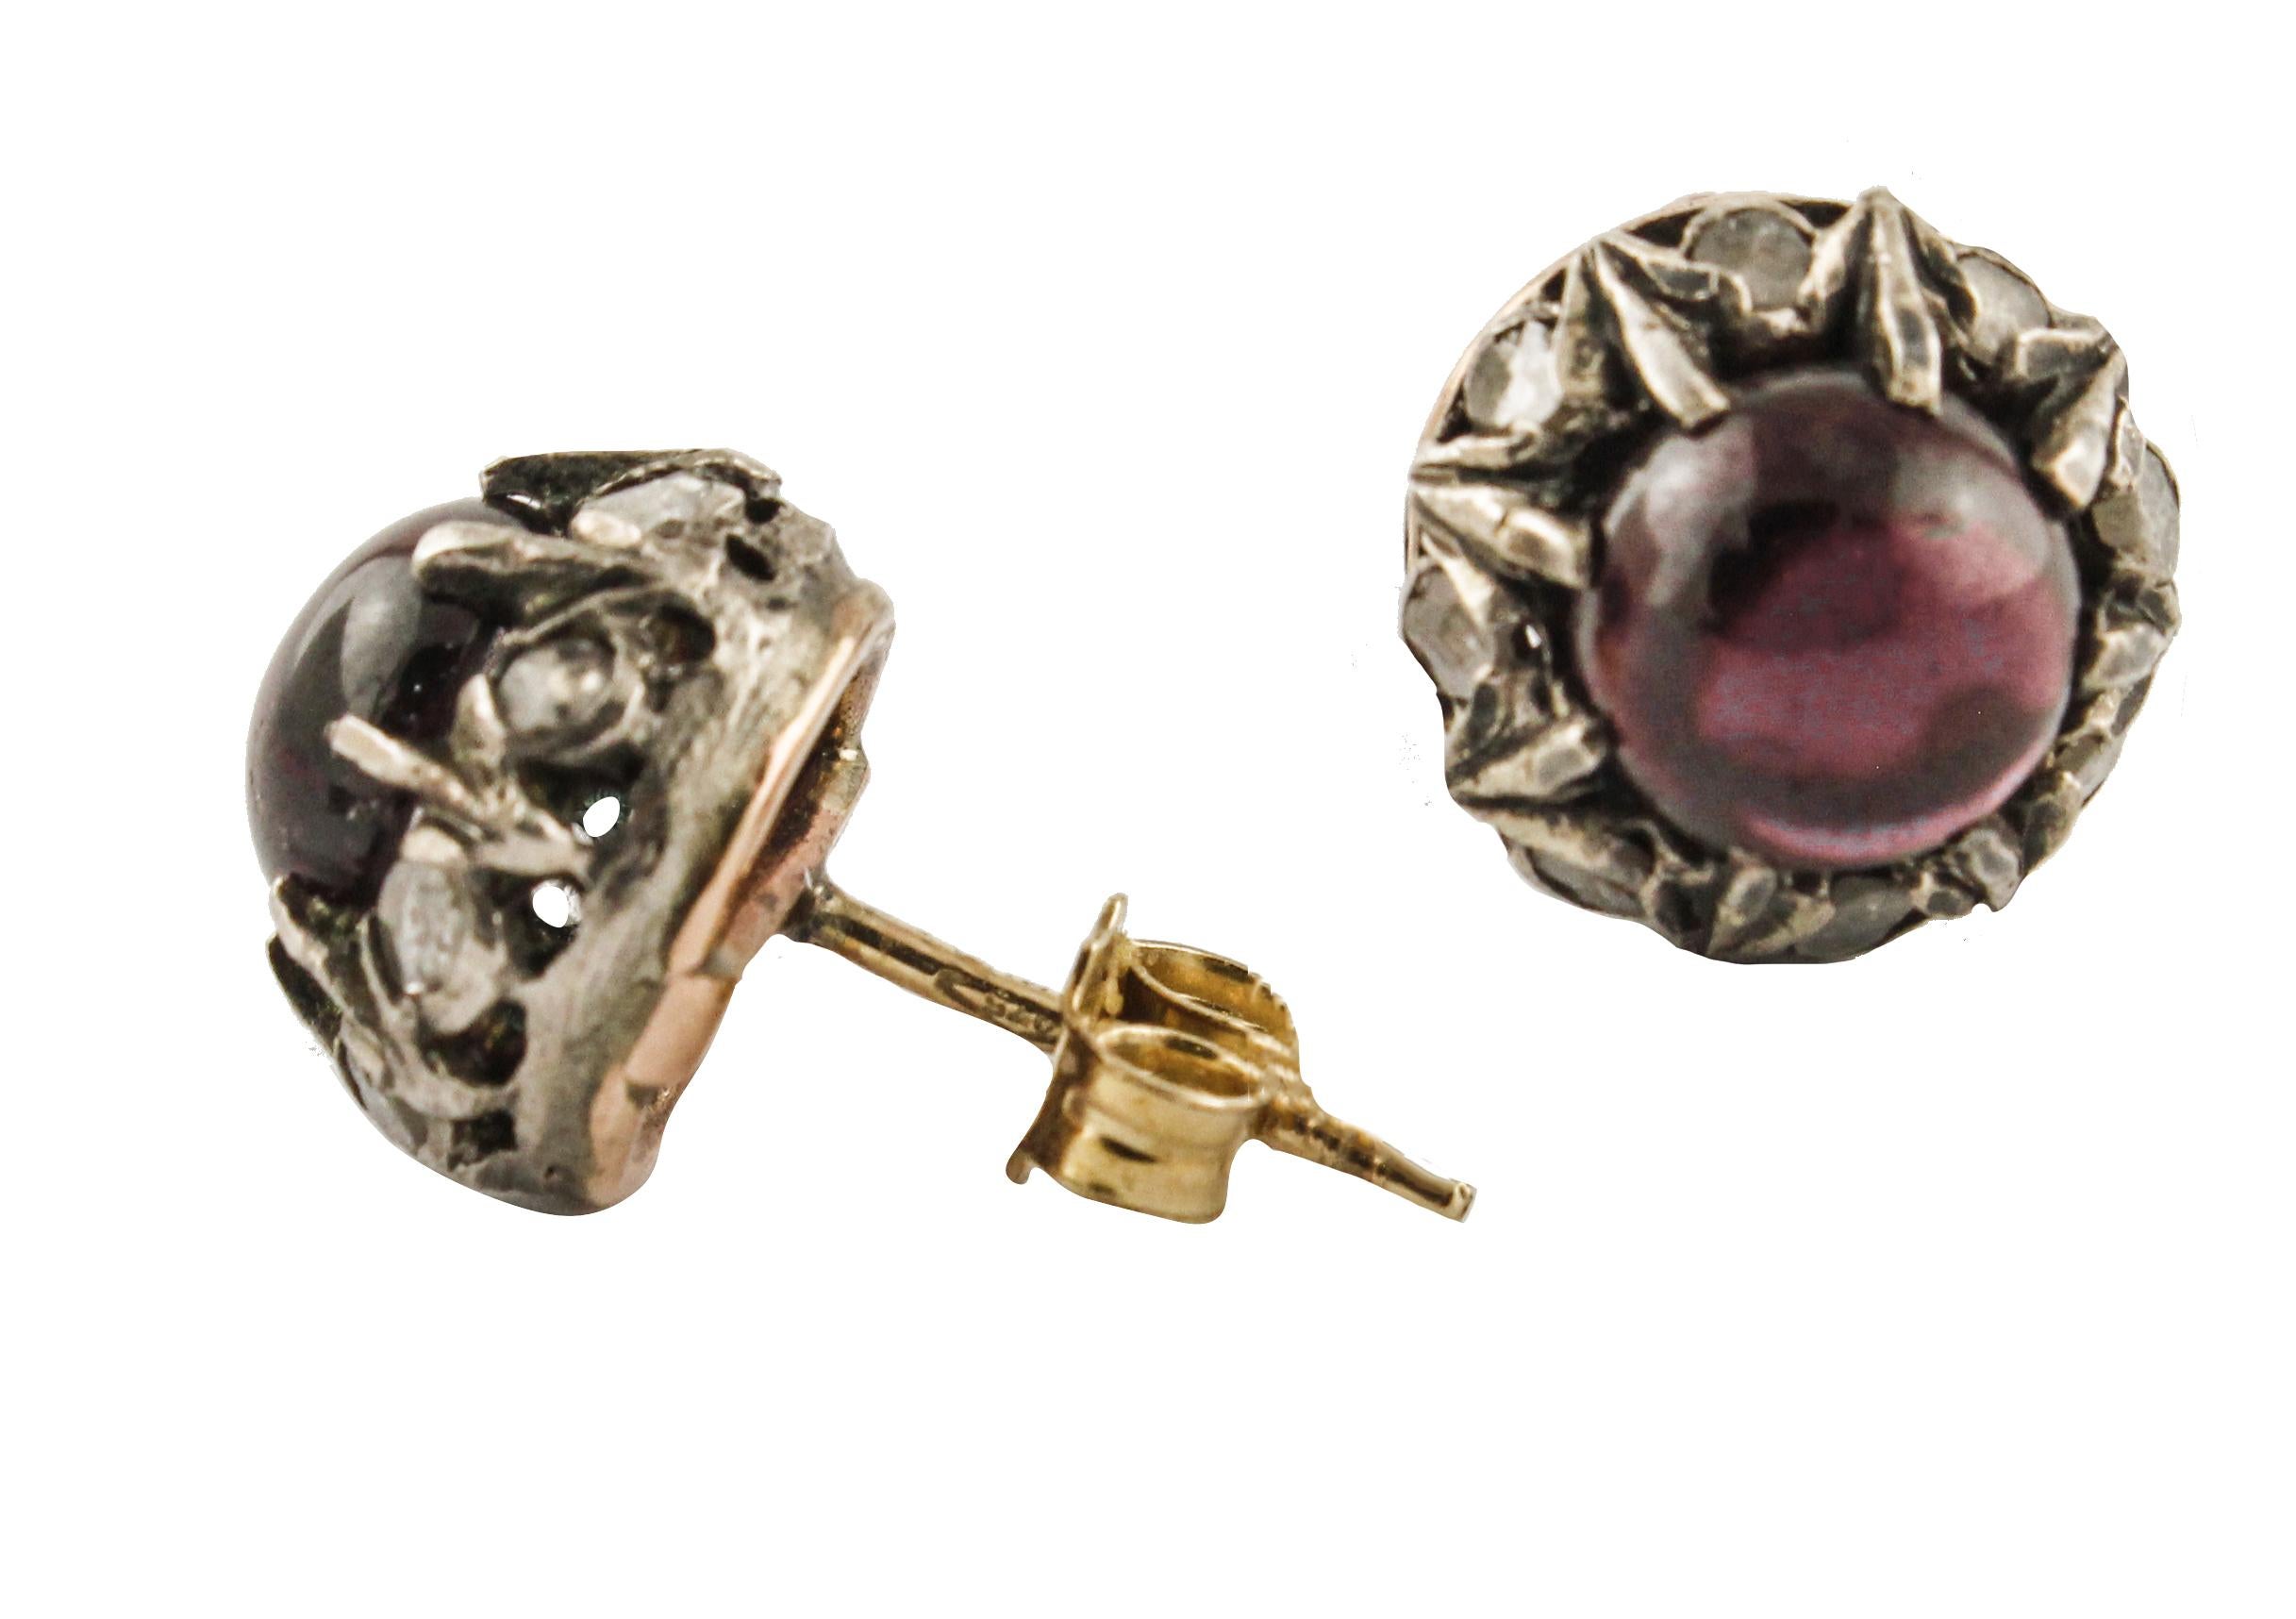 Stud earrings in 9K rose gold and silver structure mounted with garnets in the center and a diamonds crowns around them.
Diamonds 0.42 ct 
Garnets 3.70 ct
Total Weight 4 g
R.F + fee
Dimentions 1.1 cm X 1.1 cm 

For any enquires, please contact the